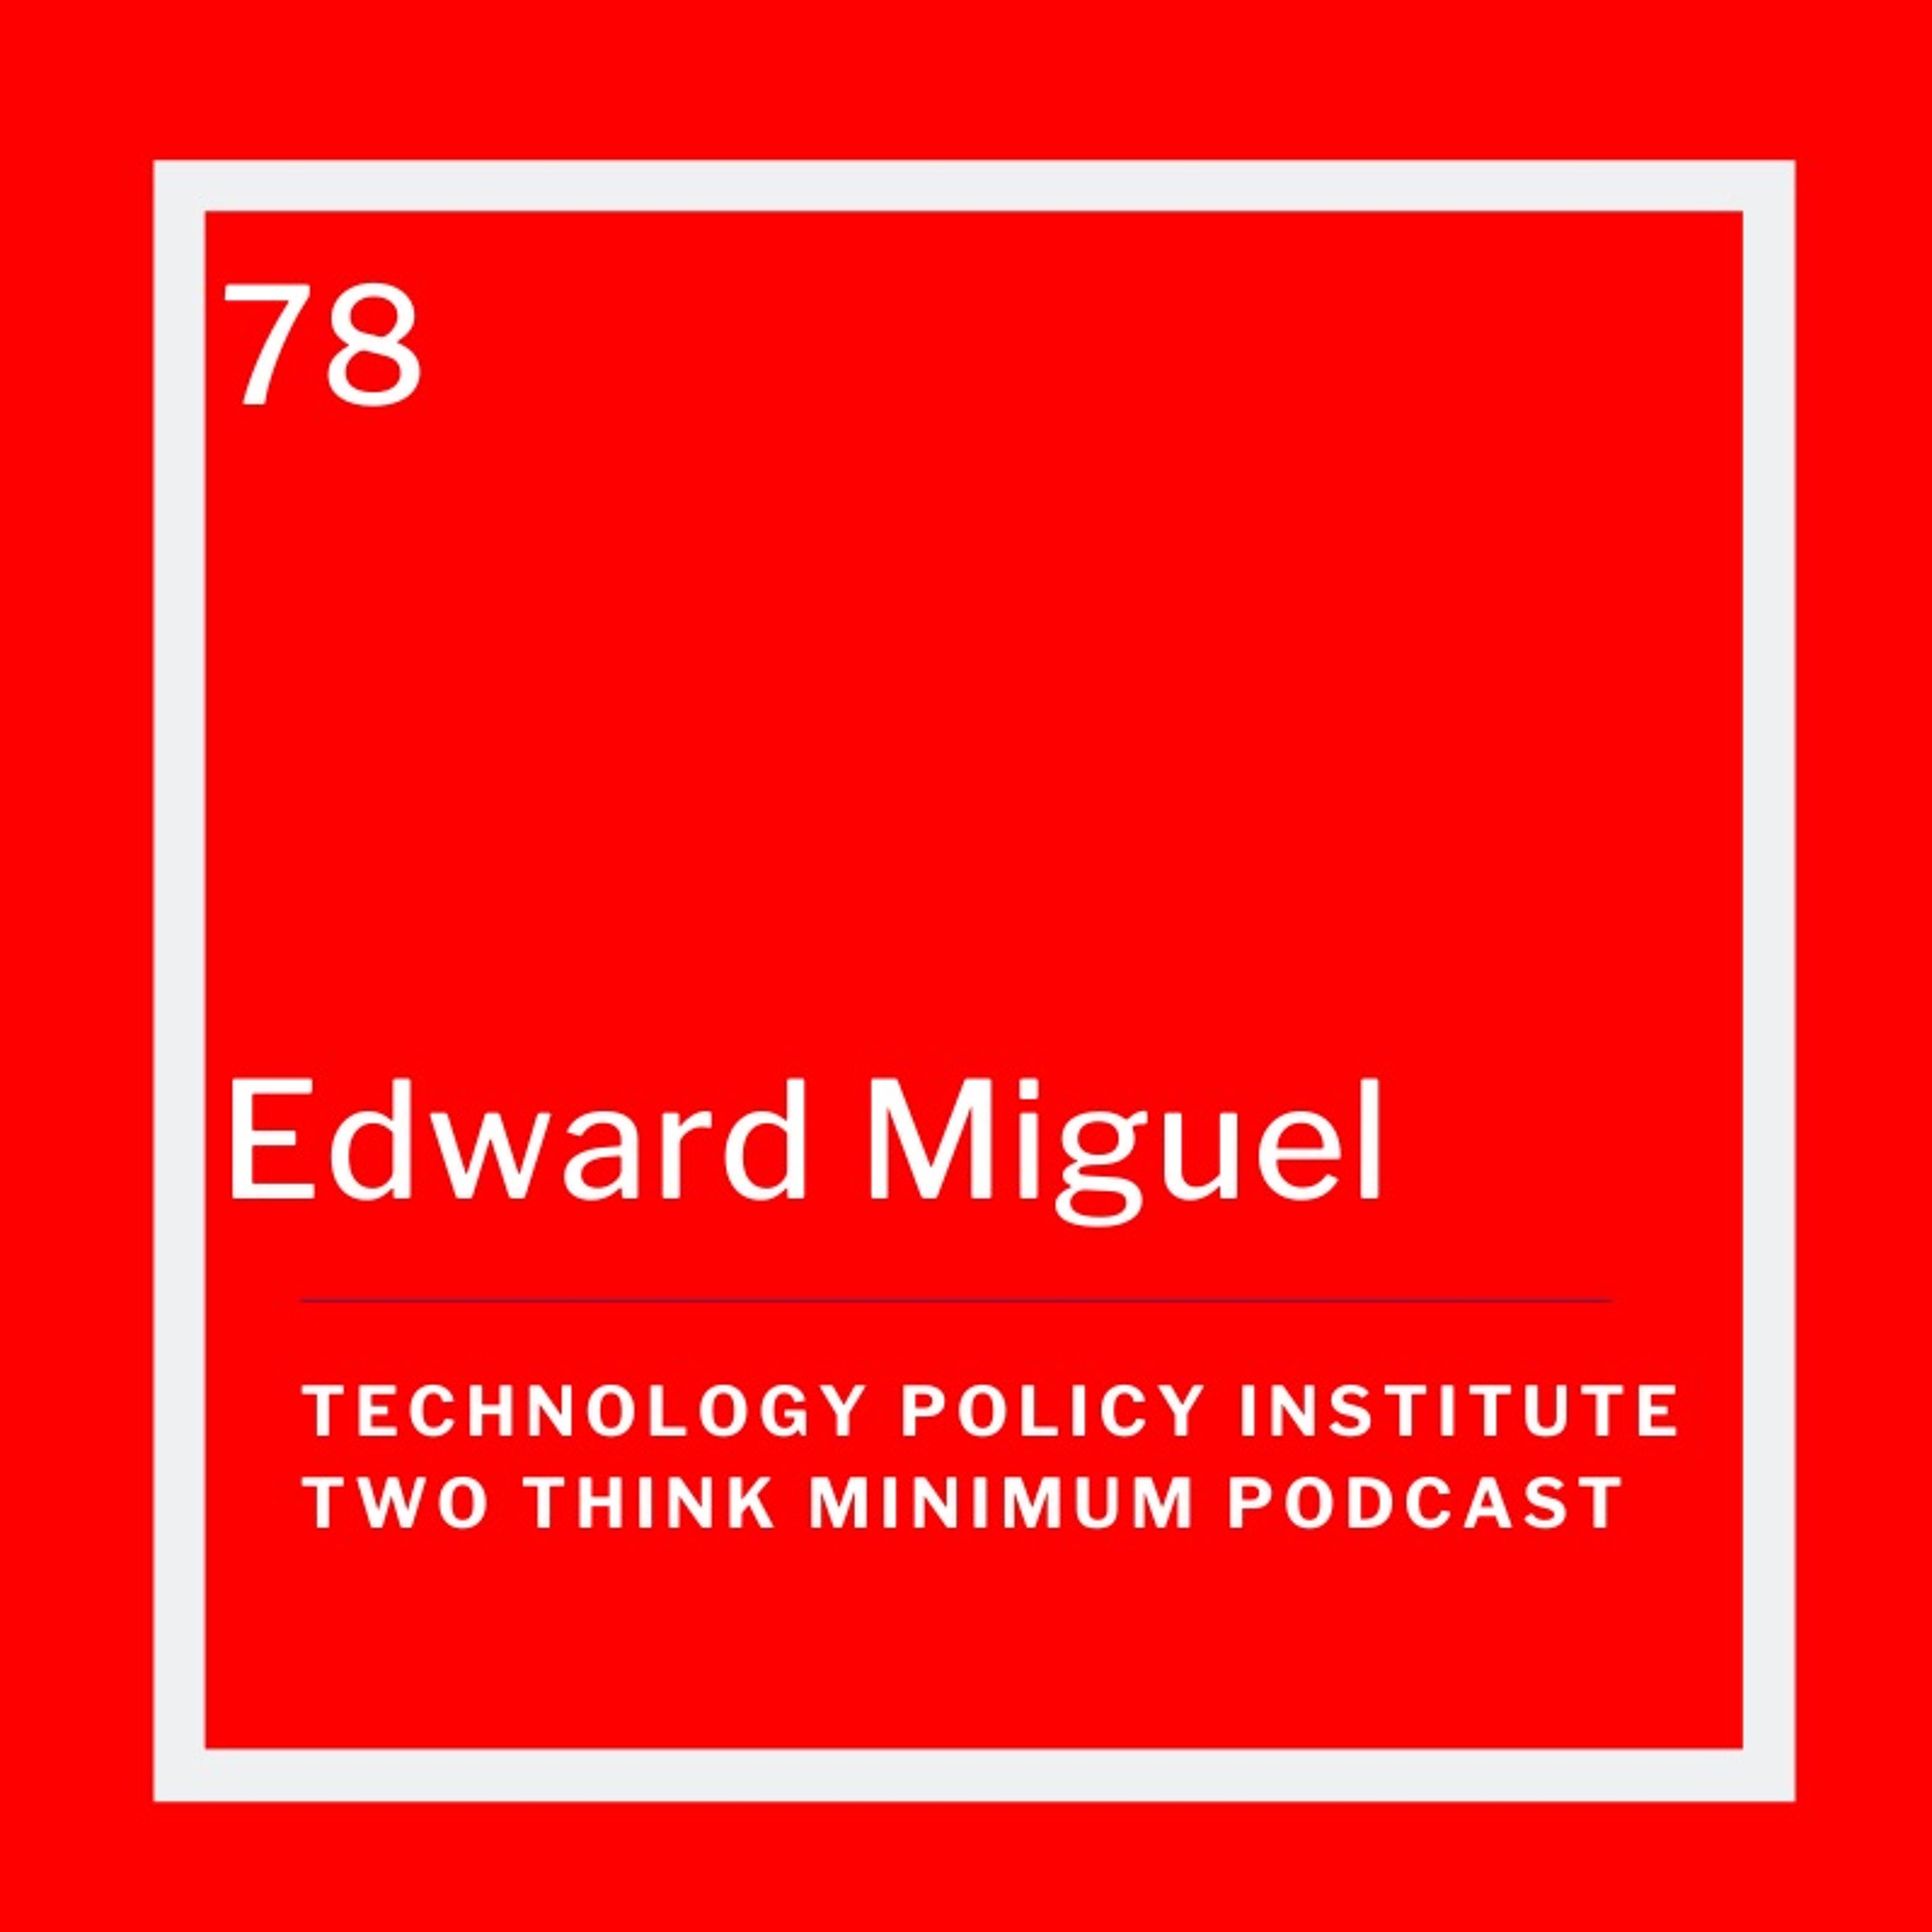 Edward Miguel on the “Replication Crisis” in Economics and How to Fix It